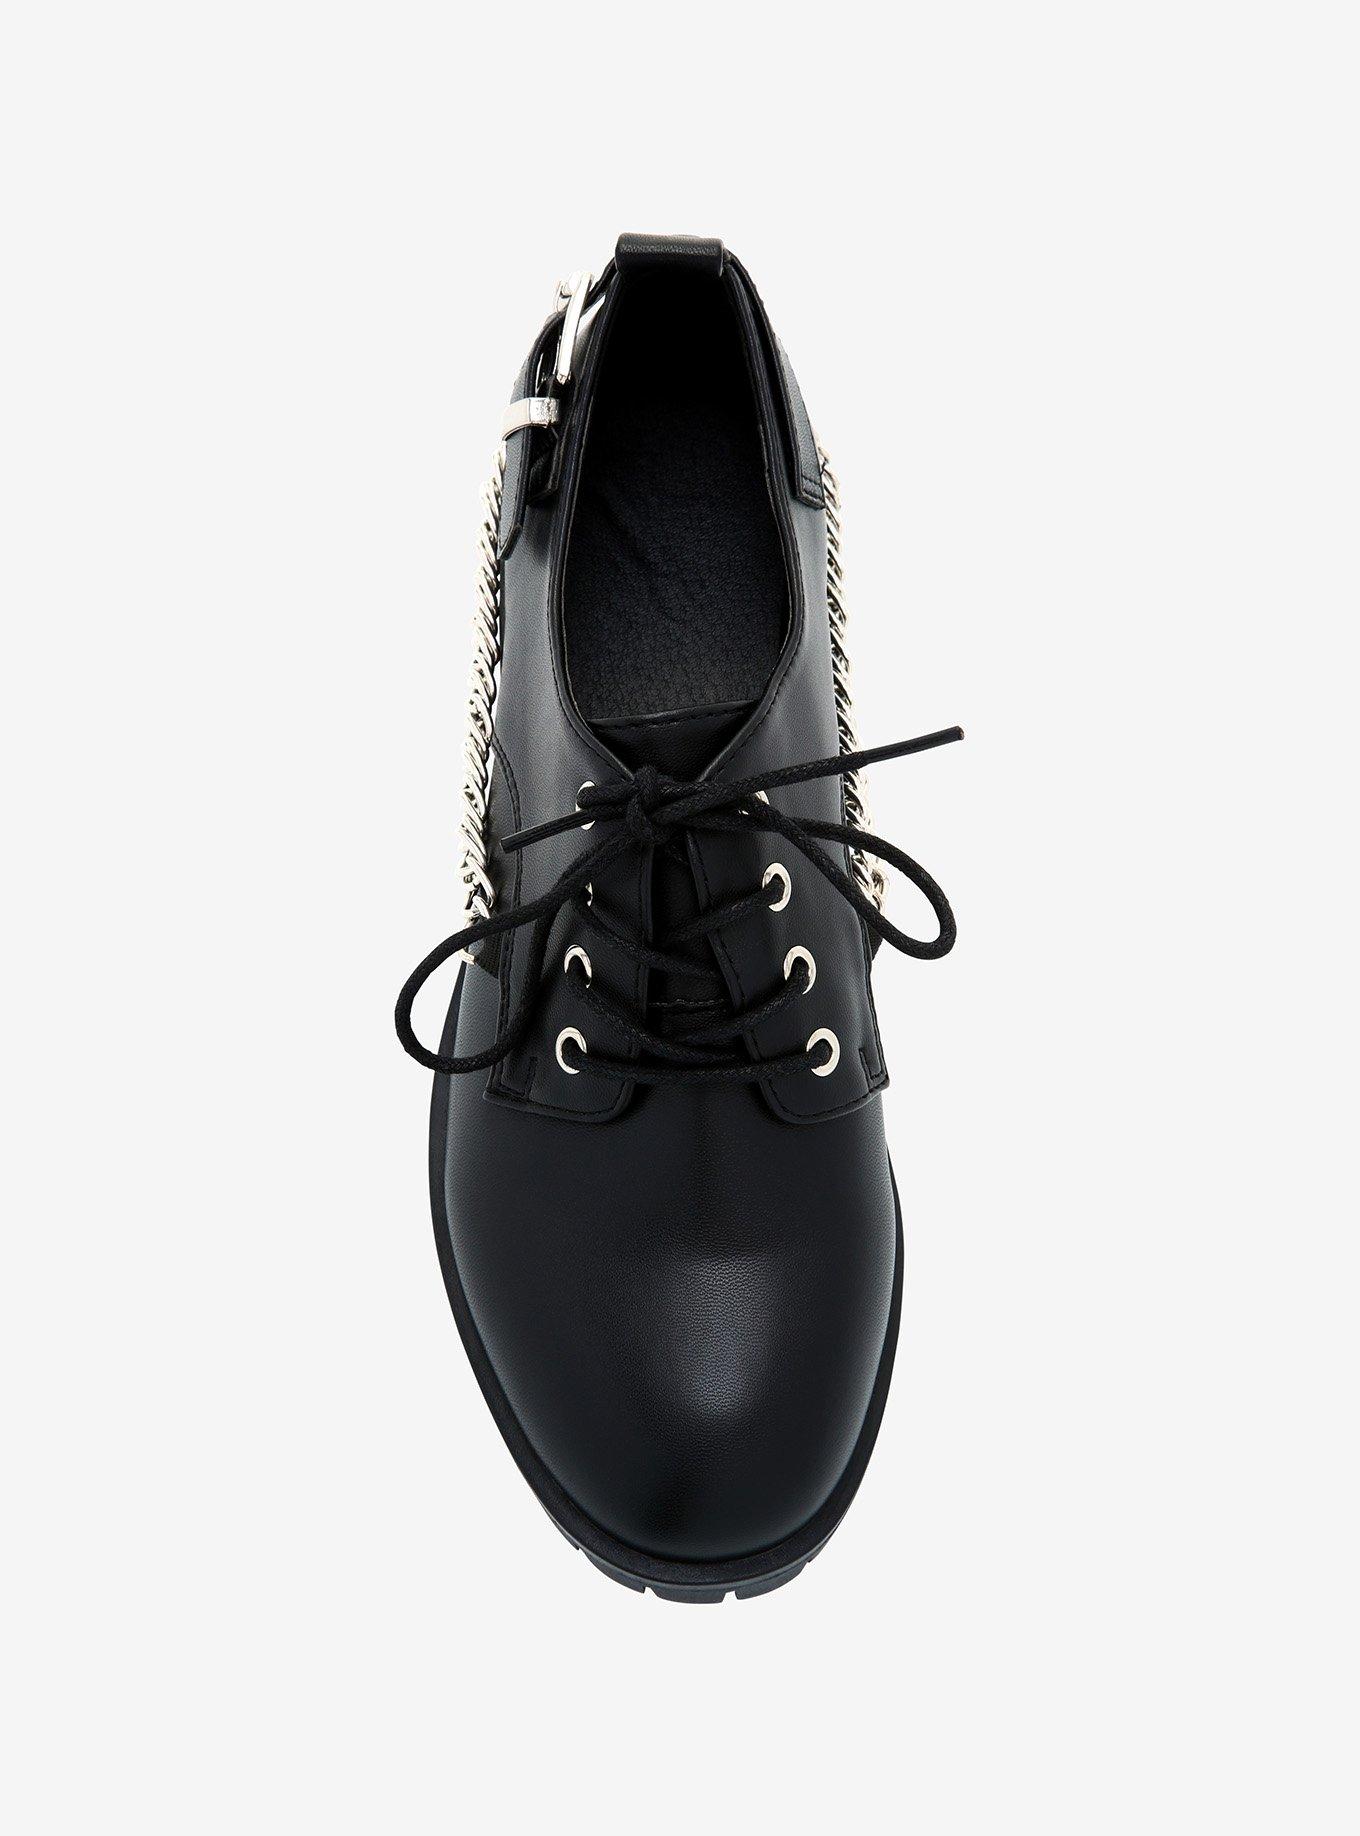 Black Buckle & Chain Lace-Up Oxfords, MULTI, alternate